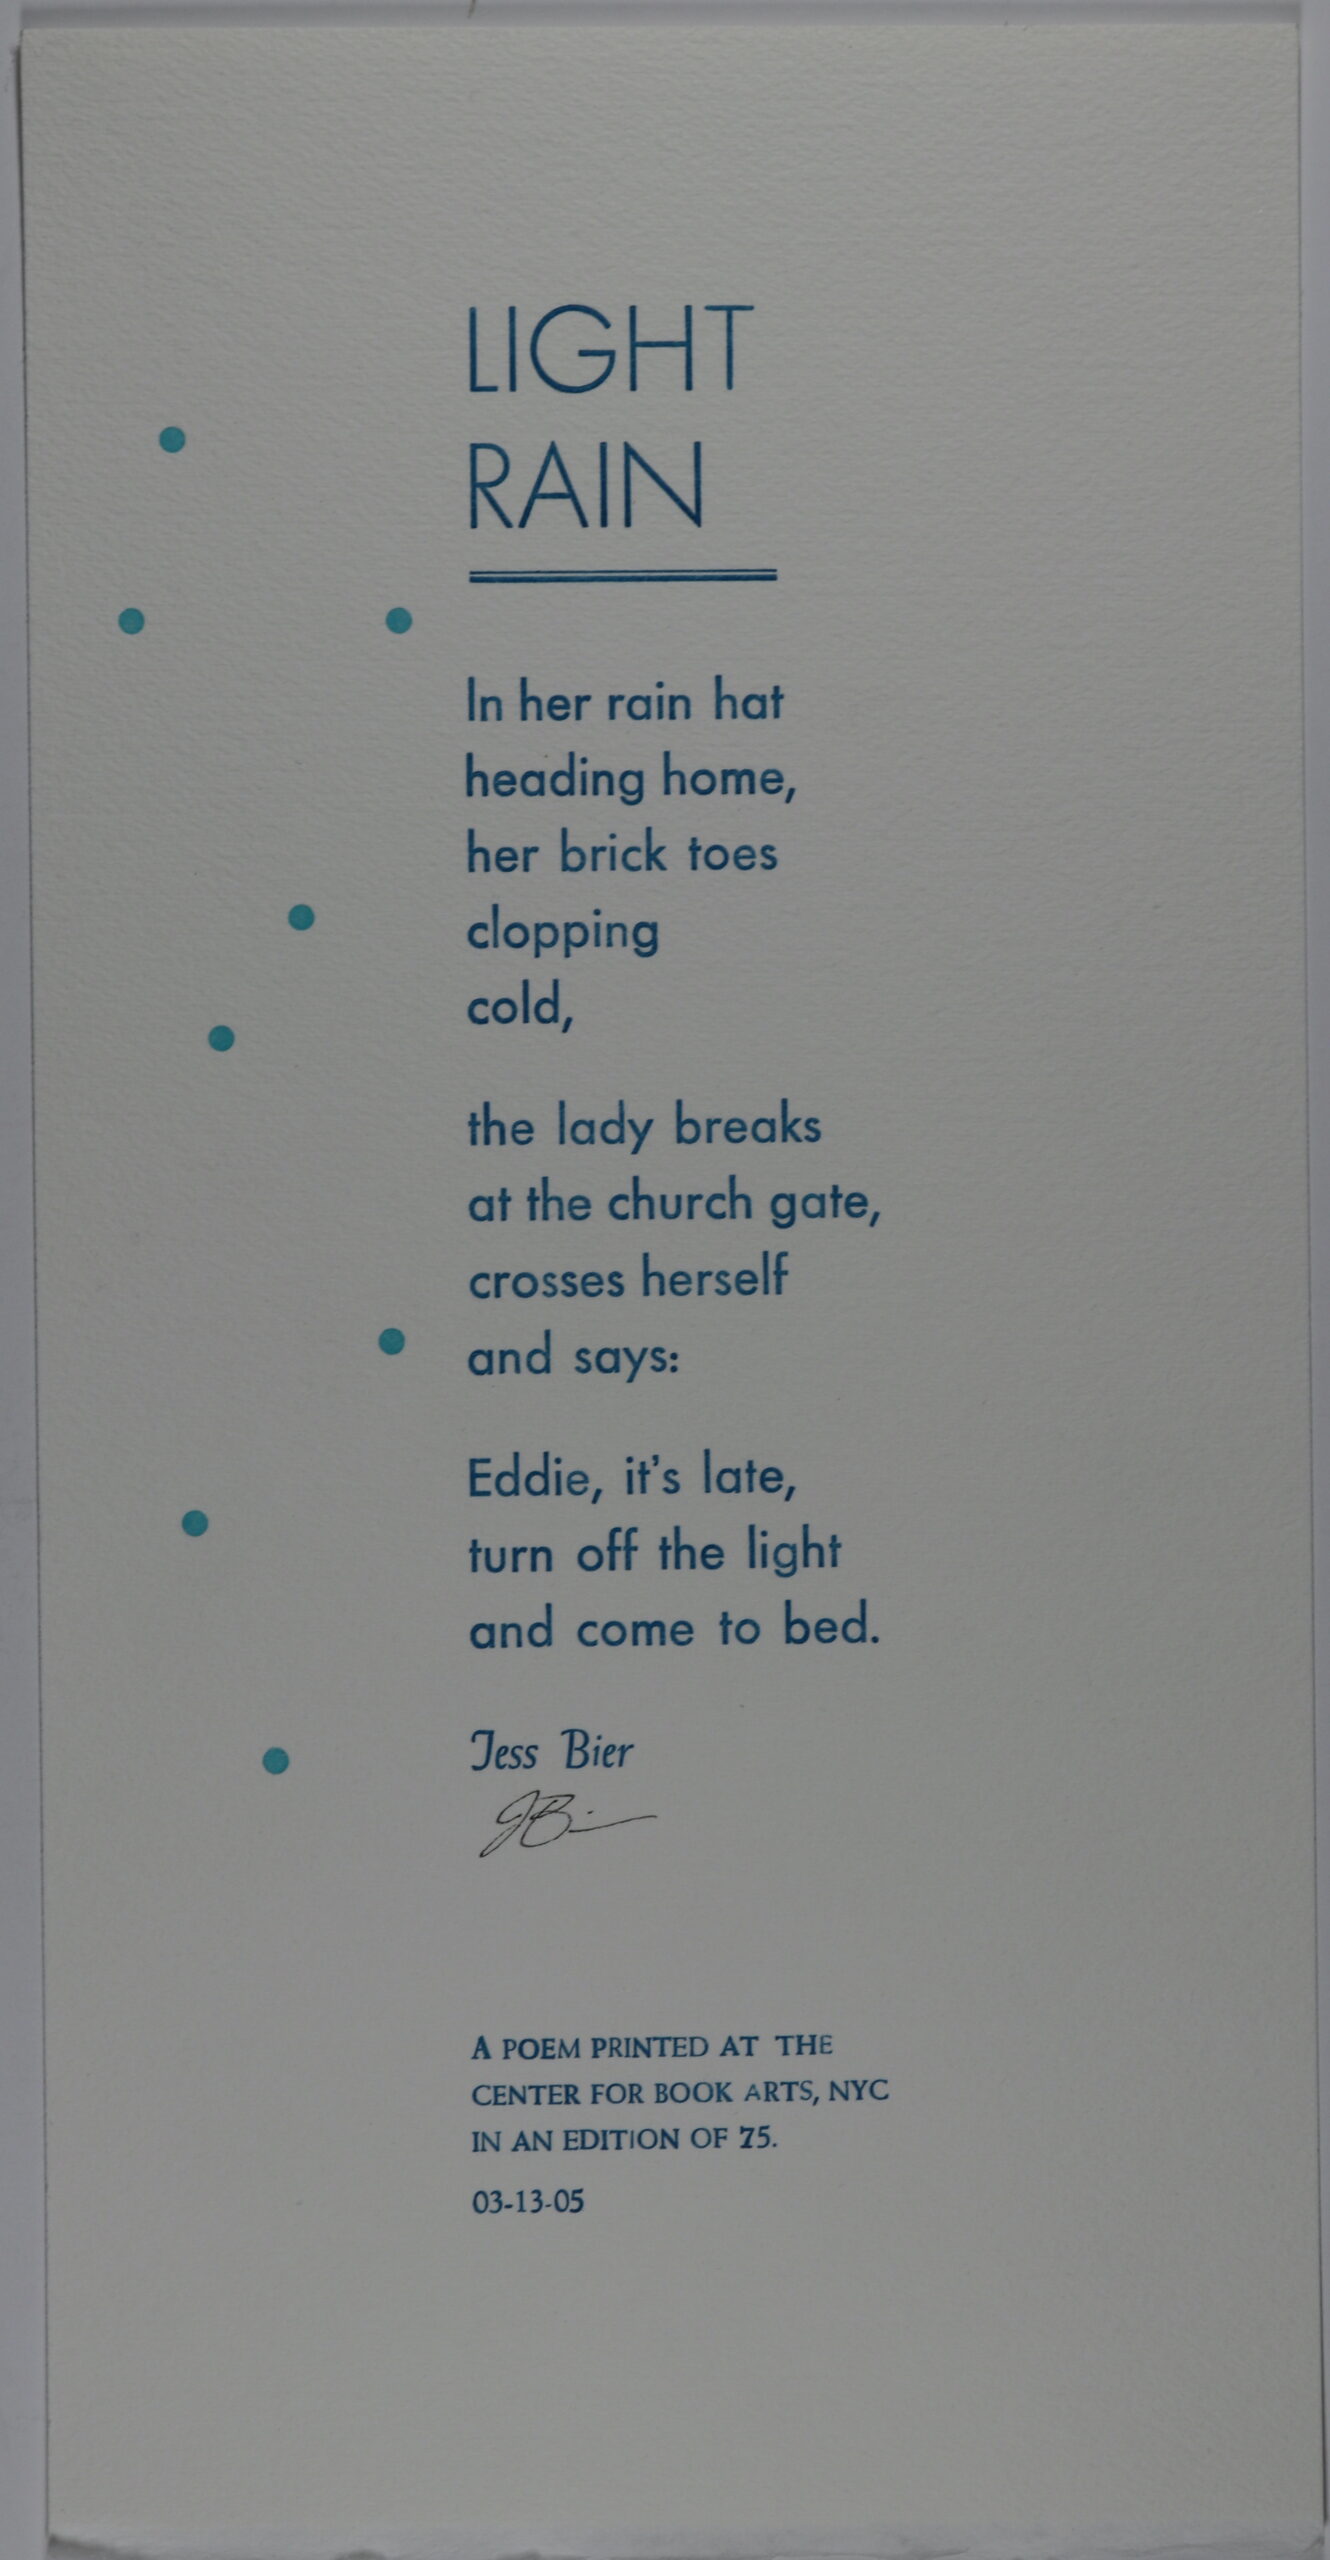 White background with blue font. Title in large letters, placed atop the text. Text separated by three paragraphs, all placed on the center of the broadside. Light blue dots decorate the left side of the broadside.